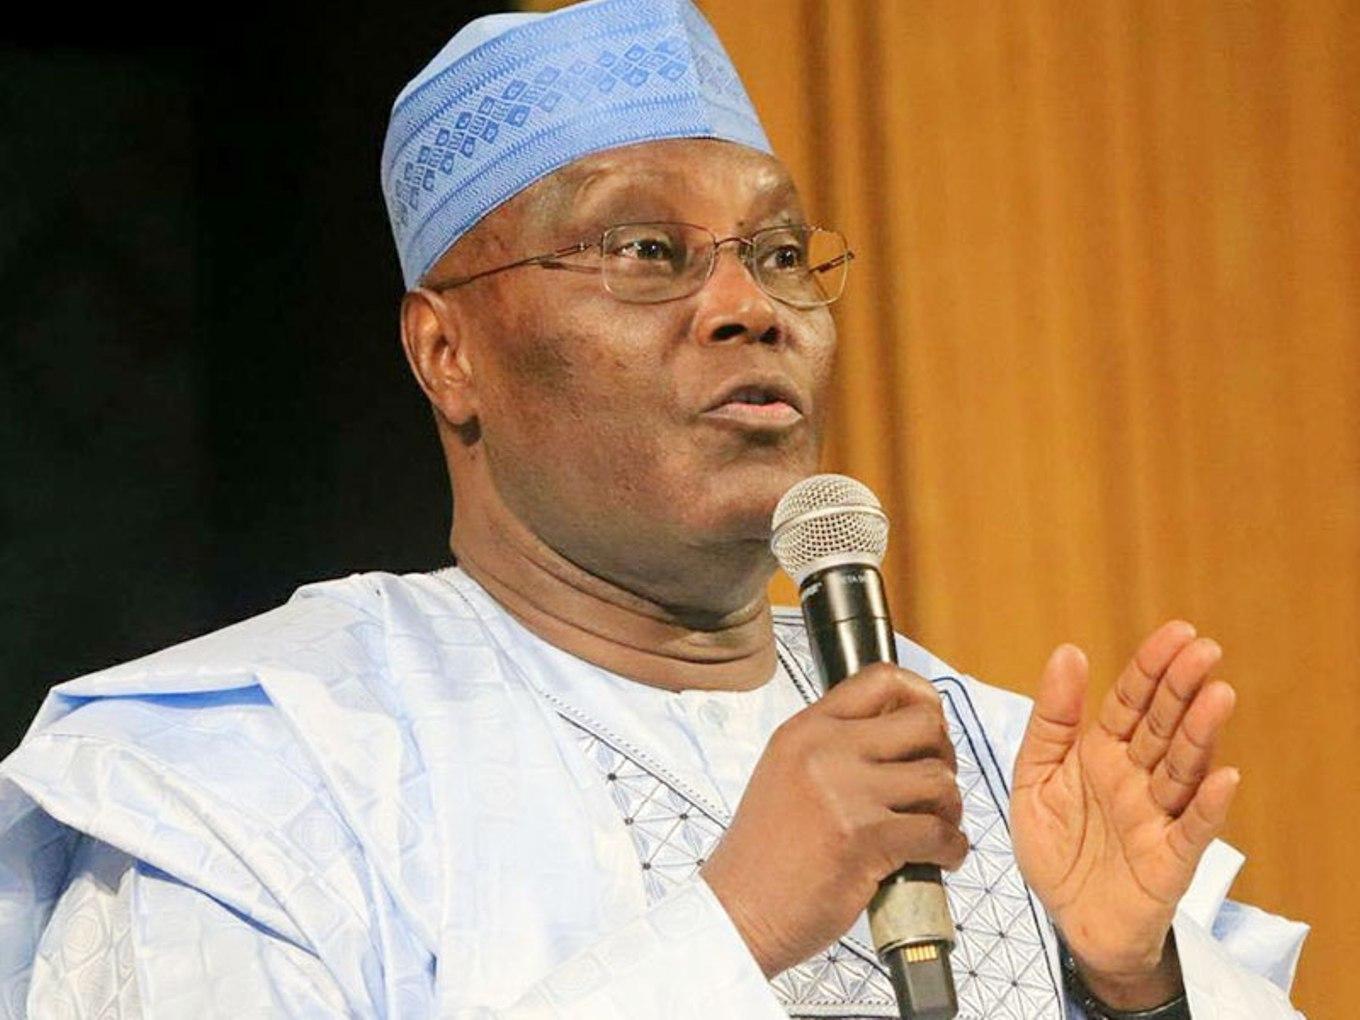 Atiku flays flagrant violation of citizens' rights by Police